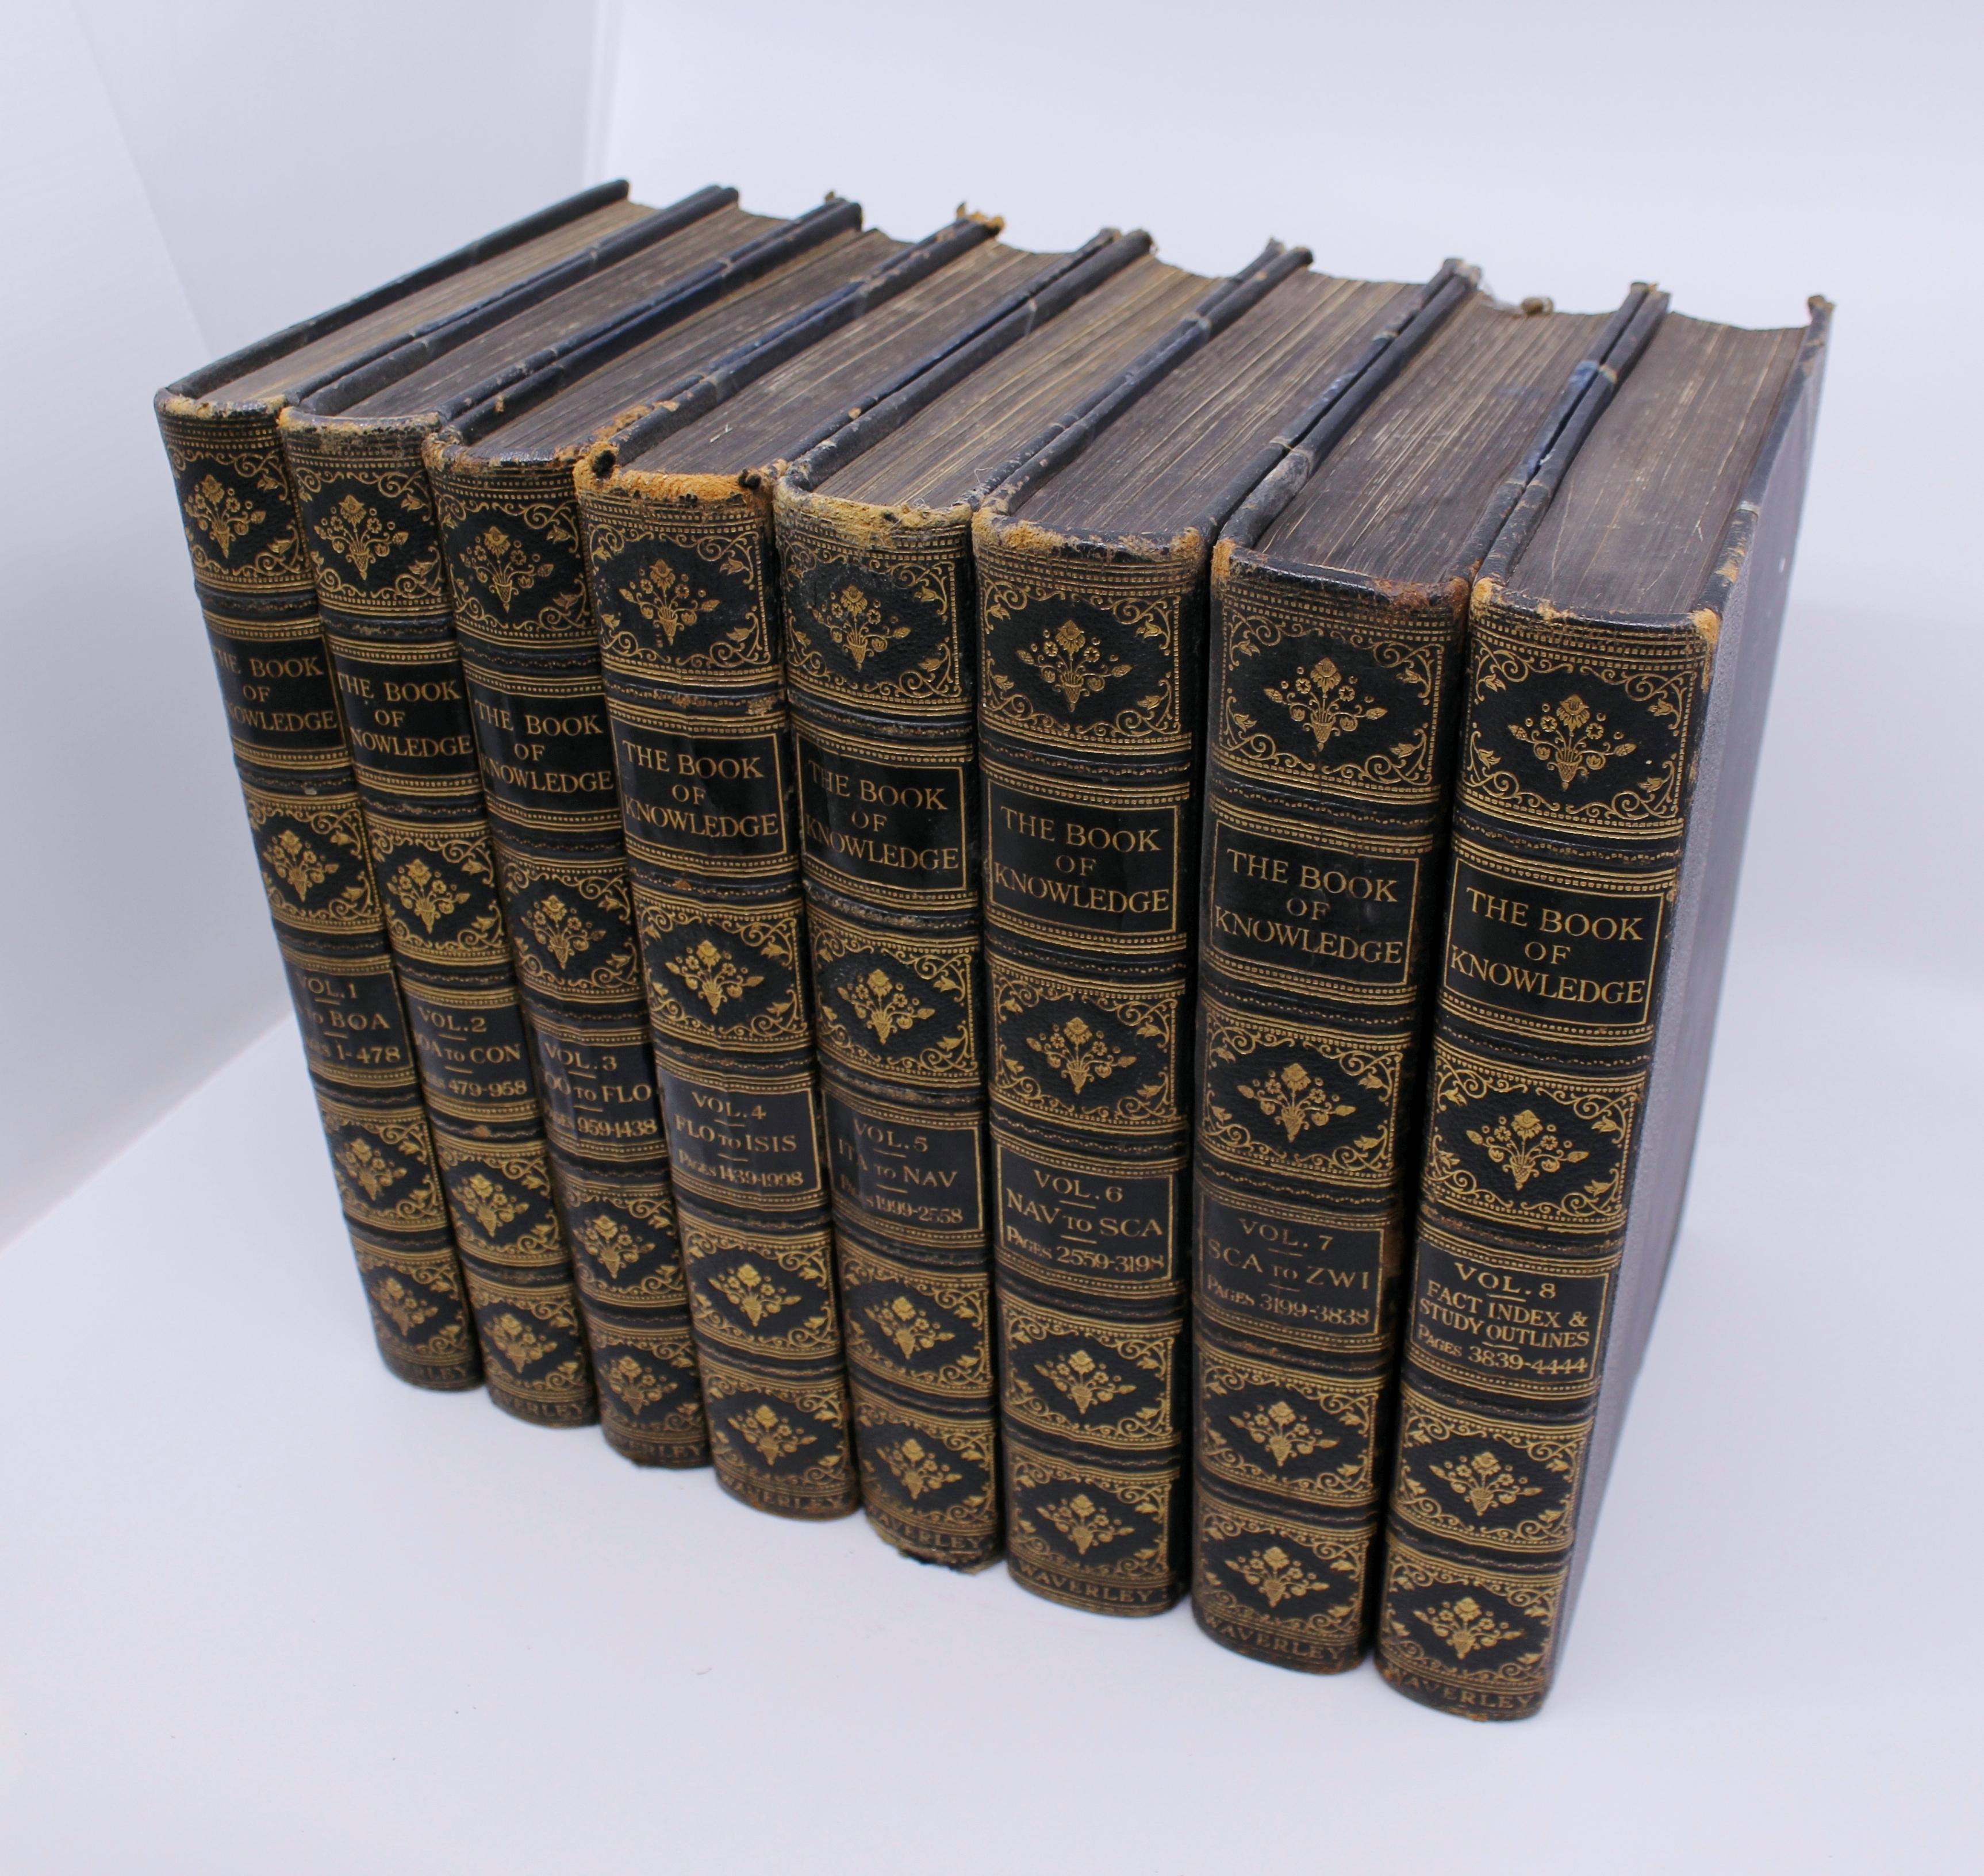 Title:
The Book of Knowledge

Publisher: 
The Waverley Book Company Ltd., London

Date: circa 1935

Editor: 
Harrold F. B. Wheeler

Size: 19 x 26 cm

Condition:
Complete set of volumes. Some shelf-wear and rubbing with some marks to